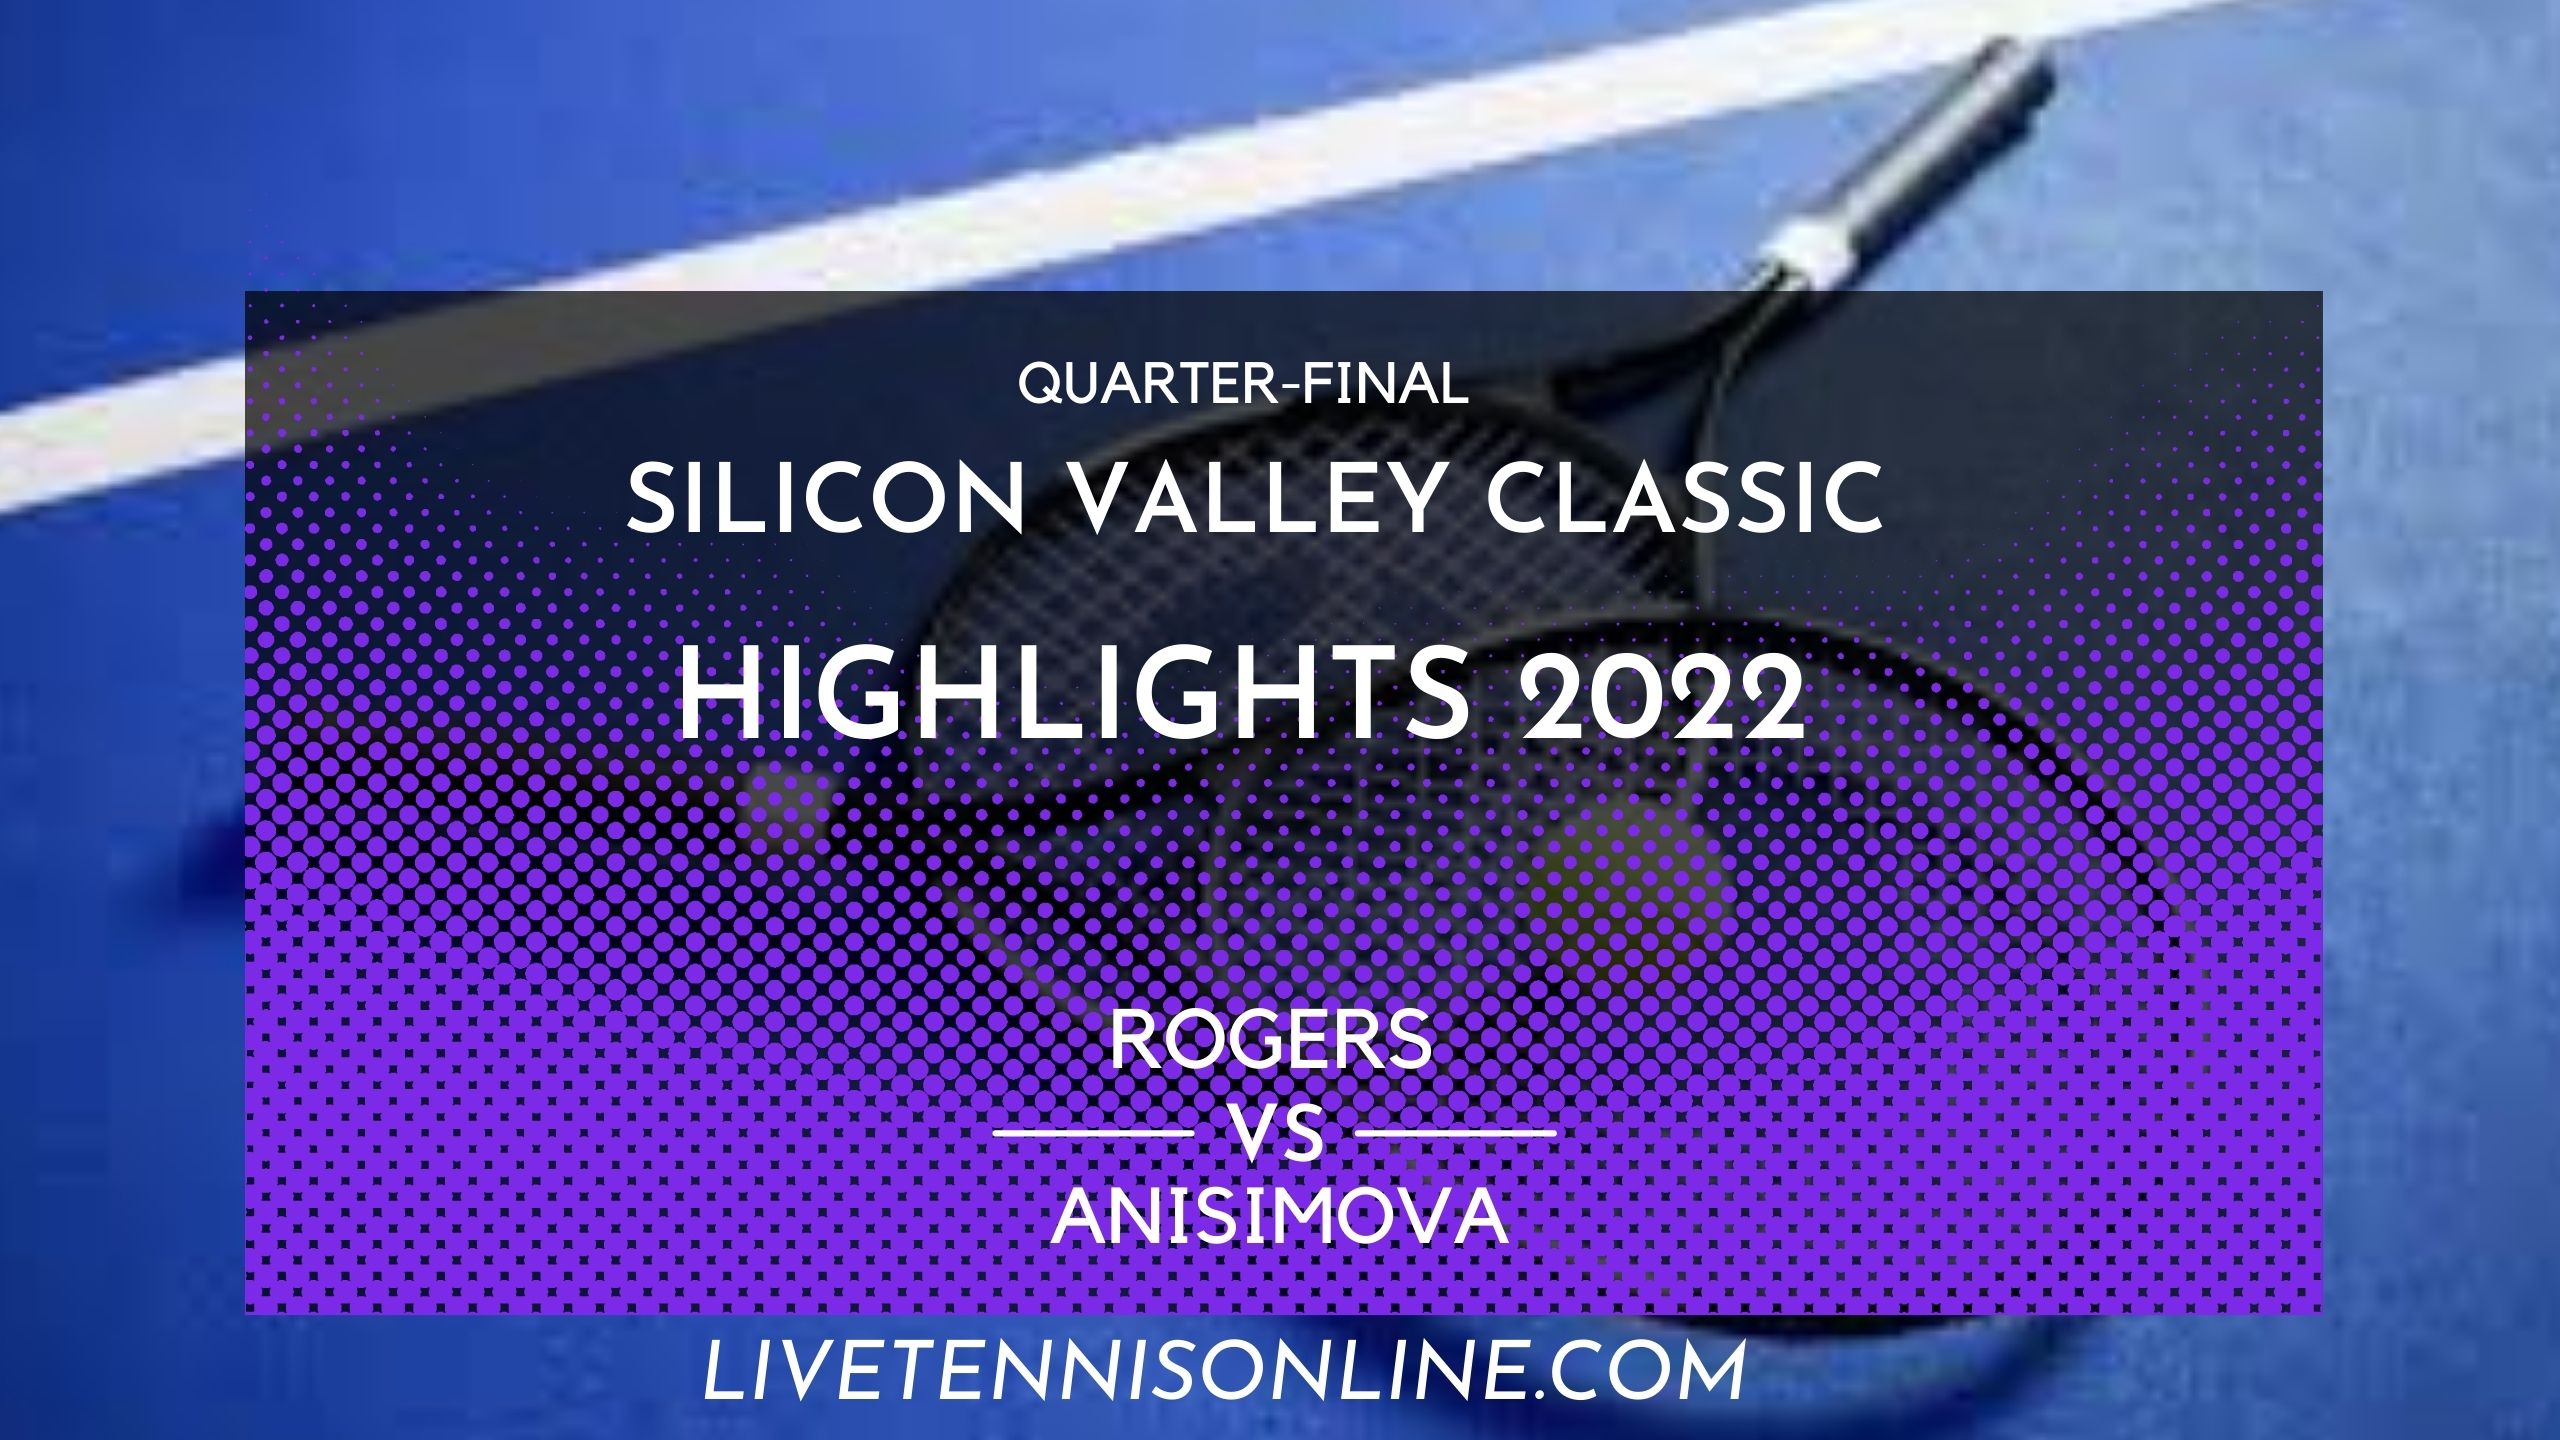 Rogers Vs Anisimova QF Highlights 2022 Silicon Valley Classic